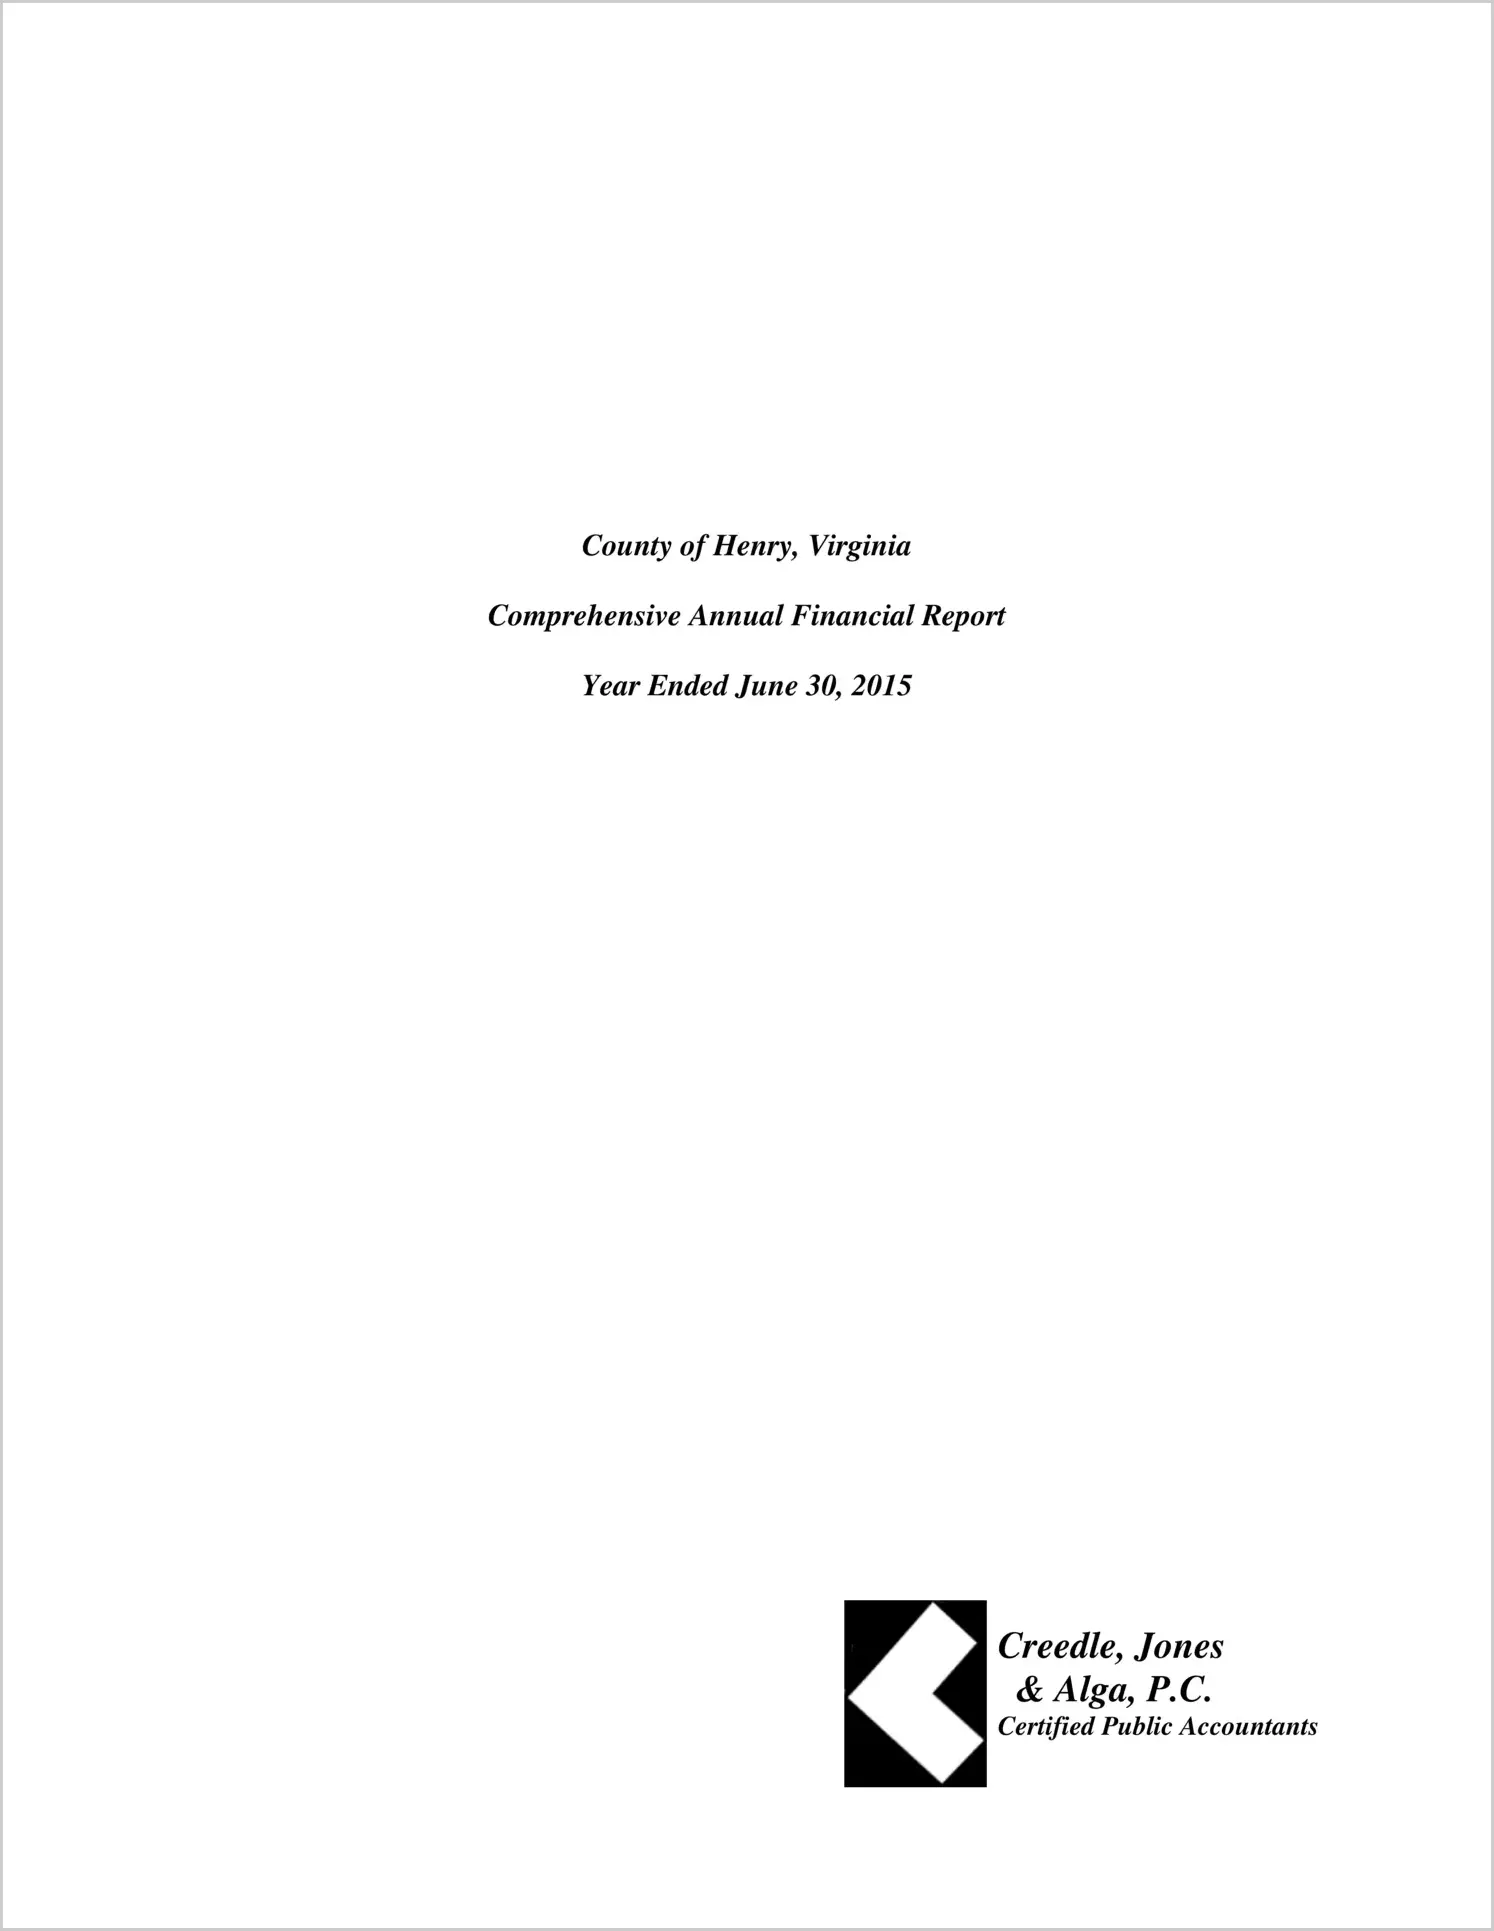 2015 Annual Financial Report for County of Henry